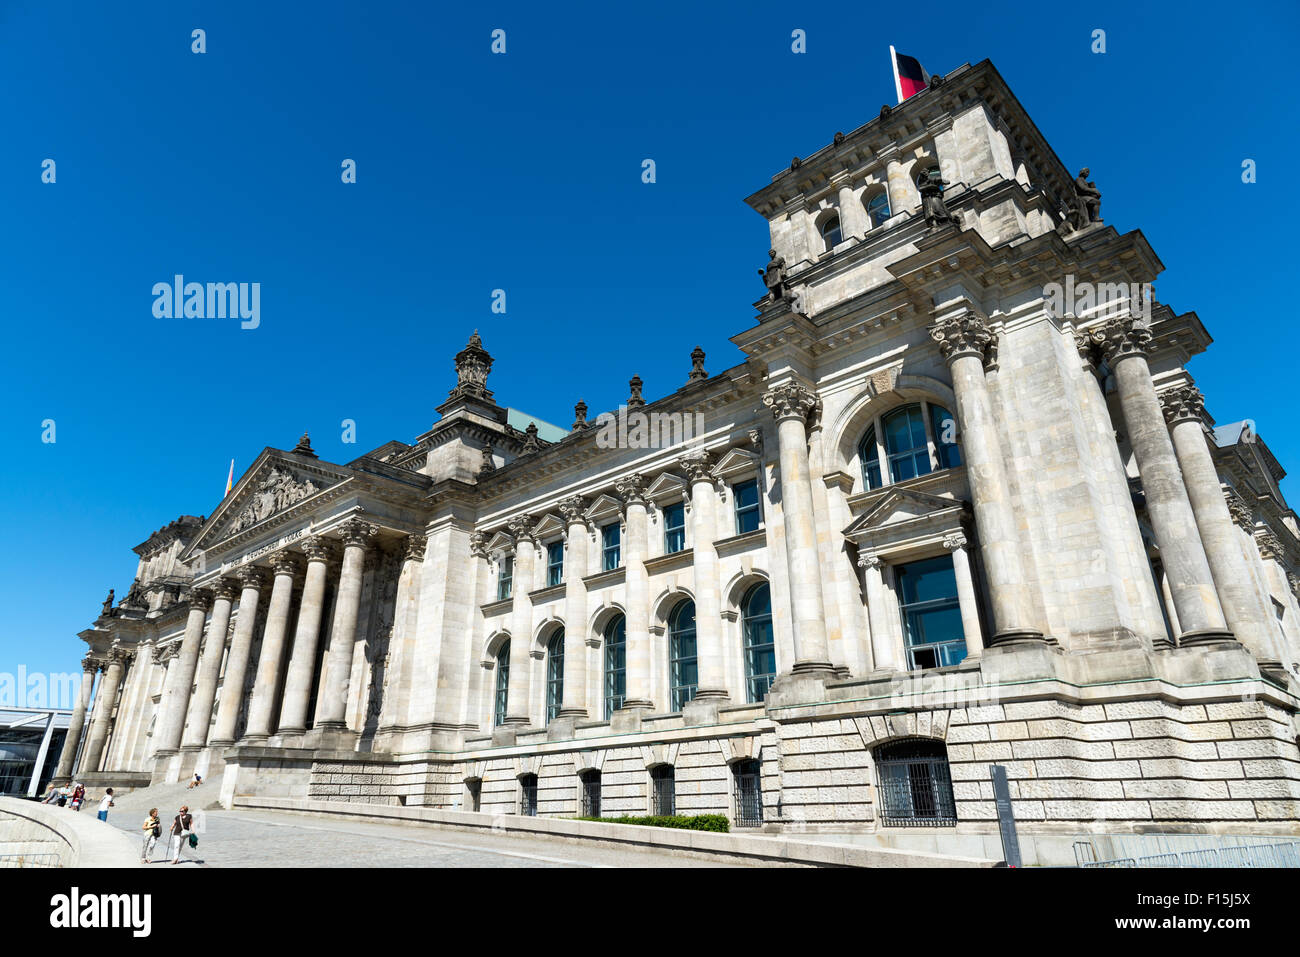 The Reichstag building, Berlin, Germany Stock Photo